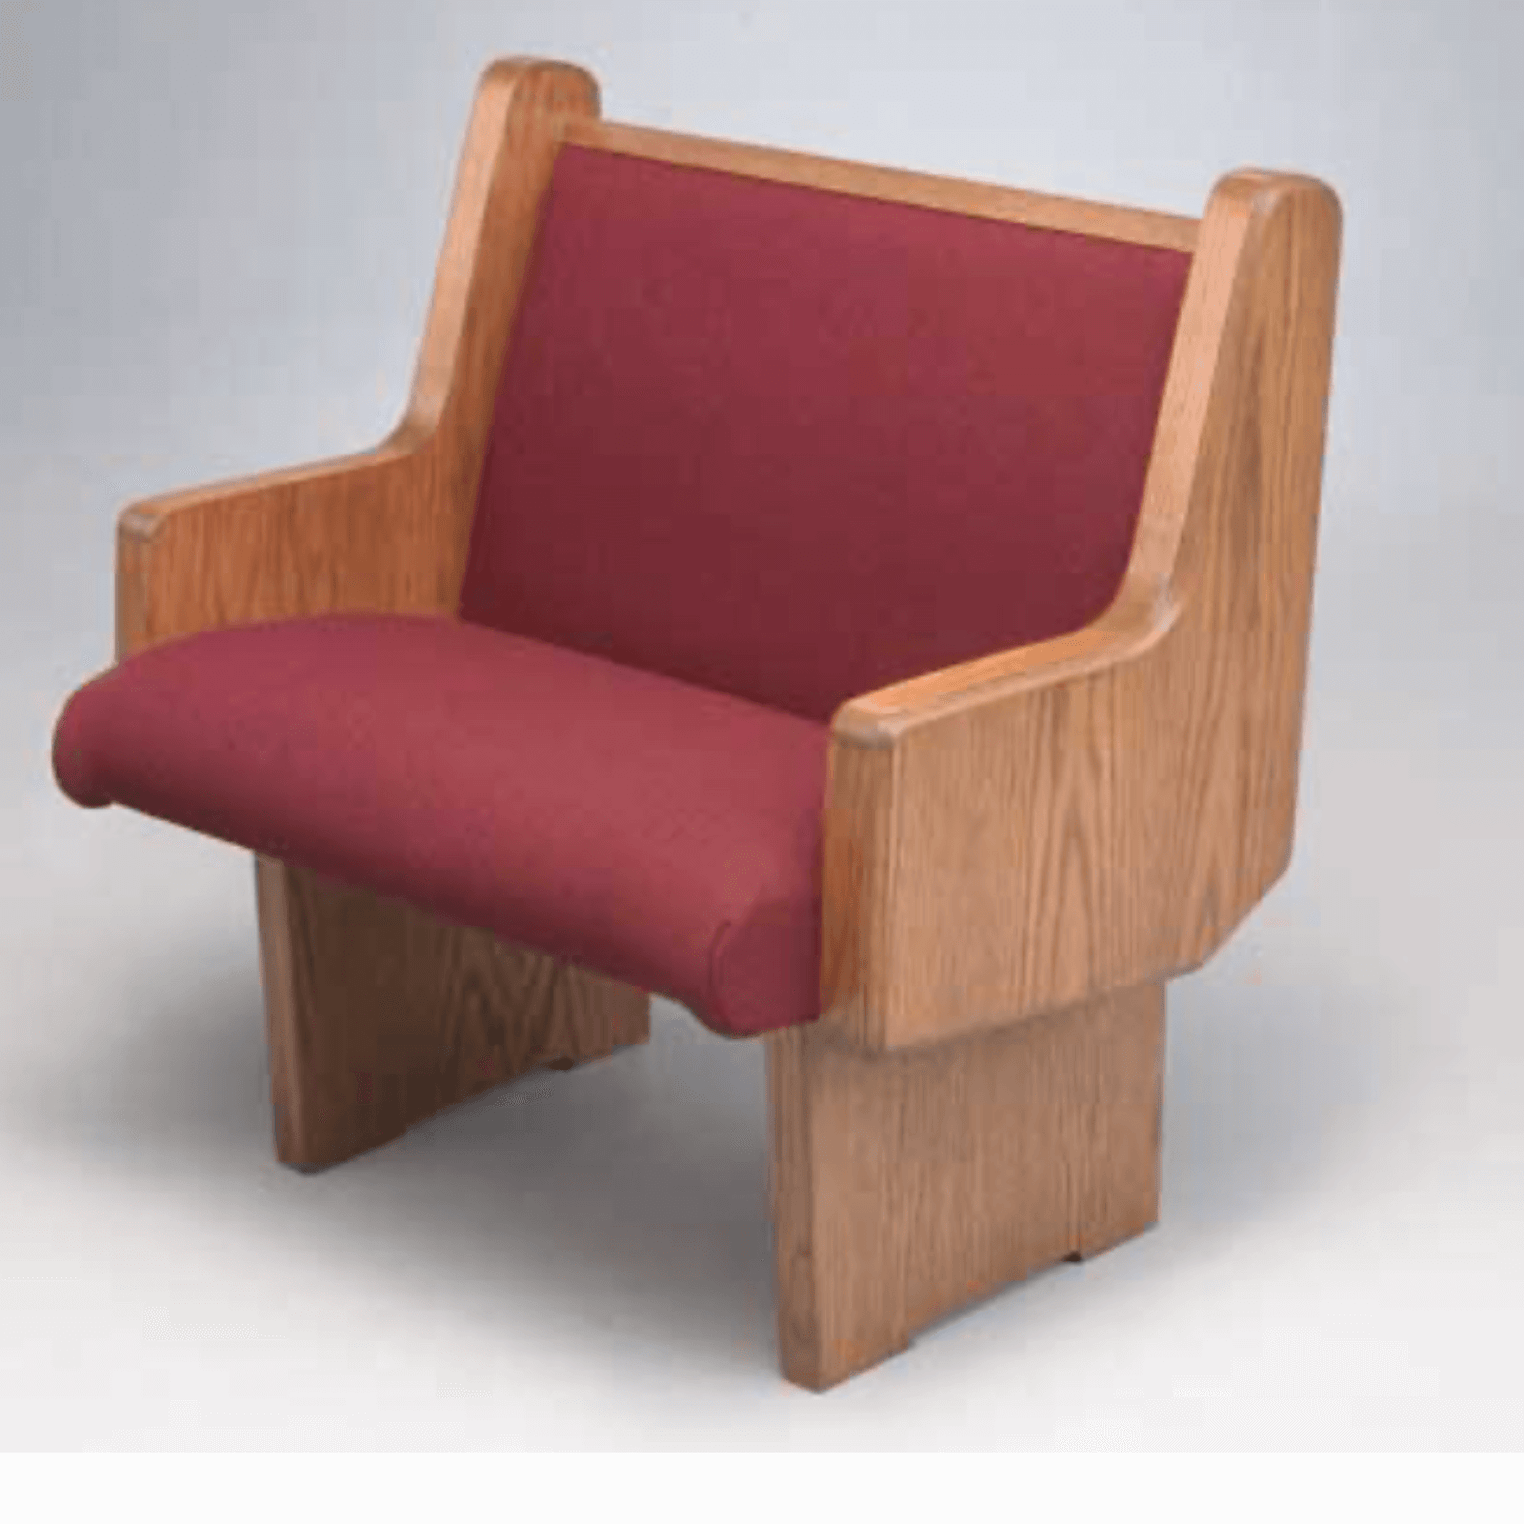 Upholstered Pew Body